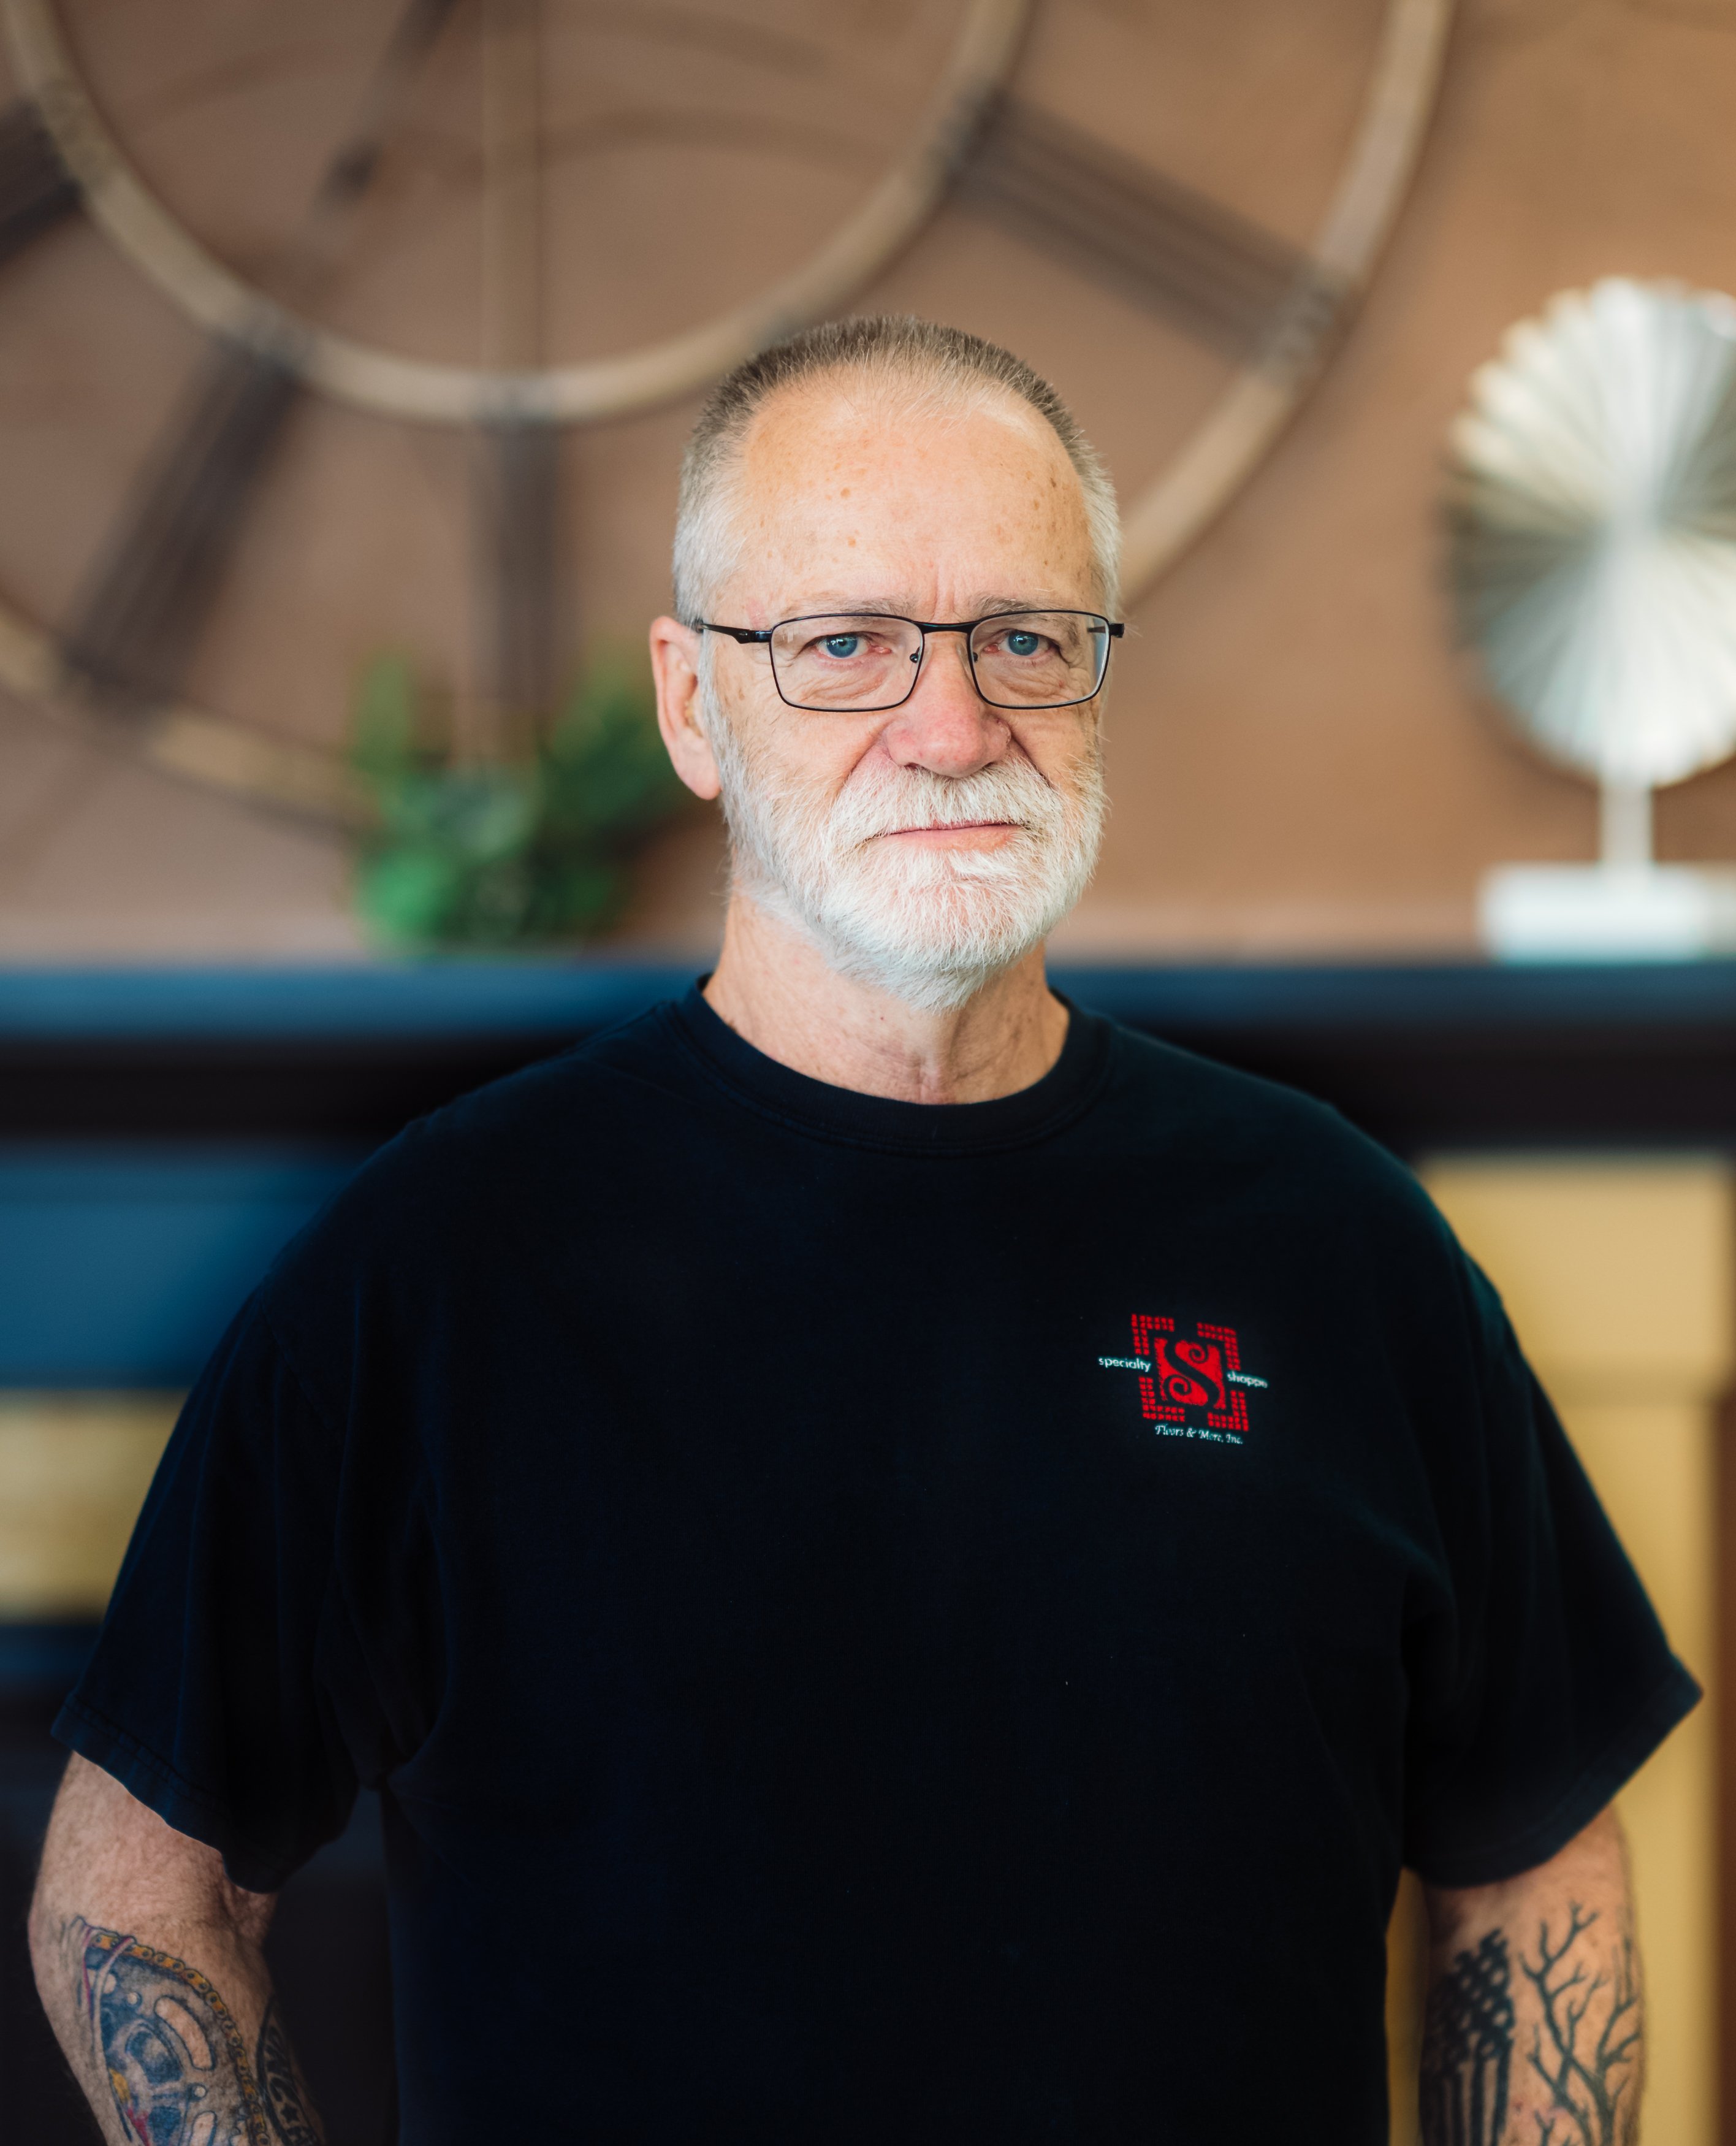 Jon, Co-owner, has been in the flooring industry for 40 years. He began as a carpet installer and still believes installations should be done the good old-fashioned way with power stretches.